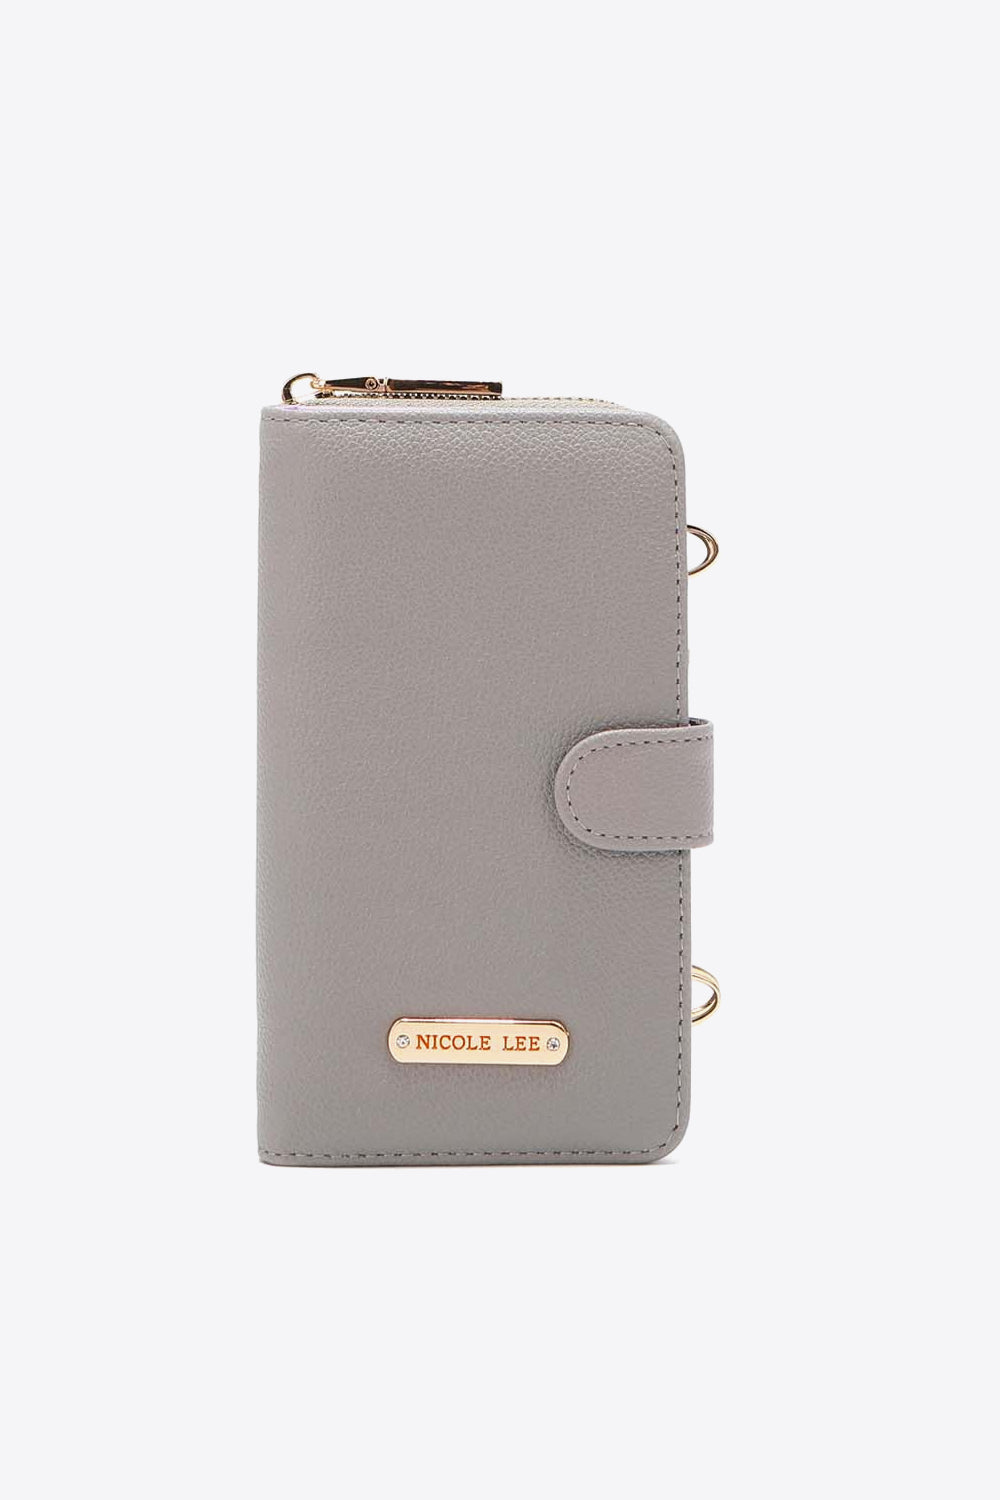 Nicole Lee USA Two-Piece Crossbody Phone Case Wallet free shipping -Oh Em Gee Boutique